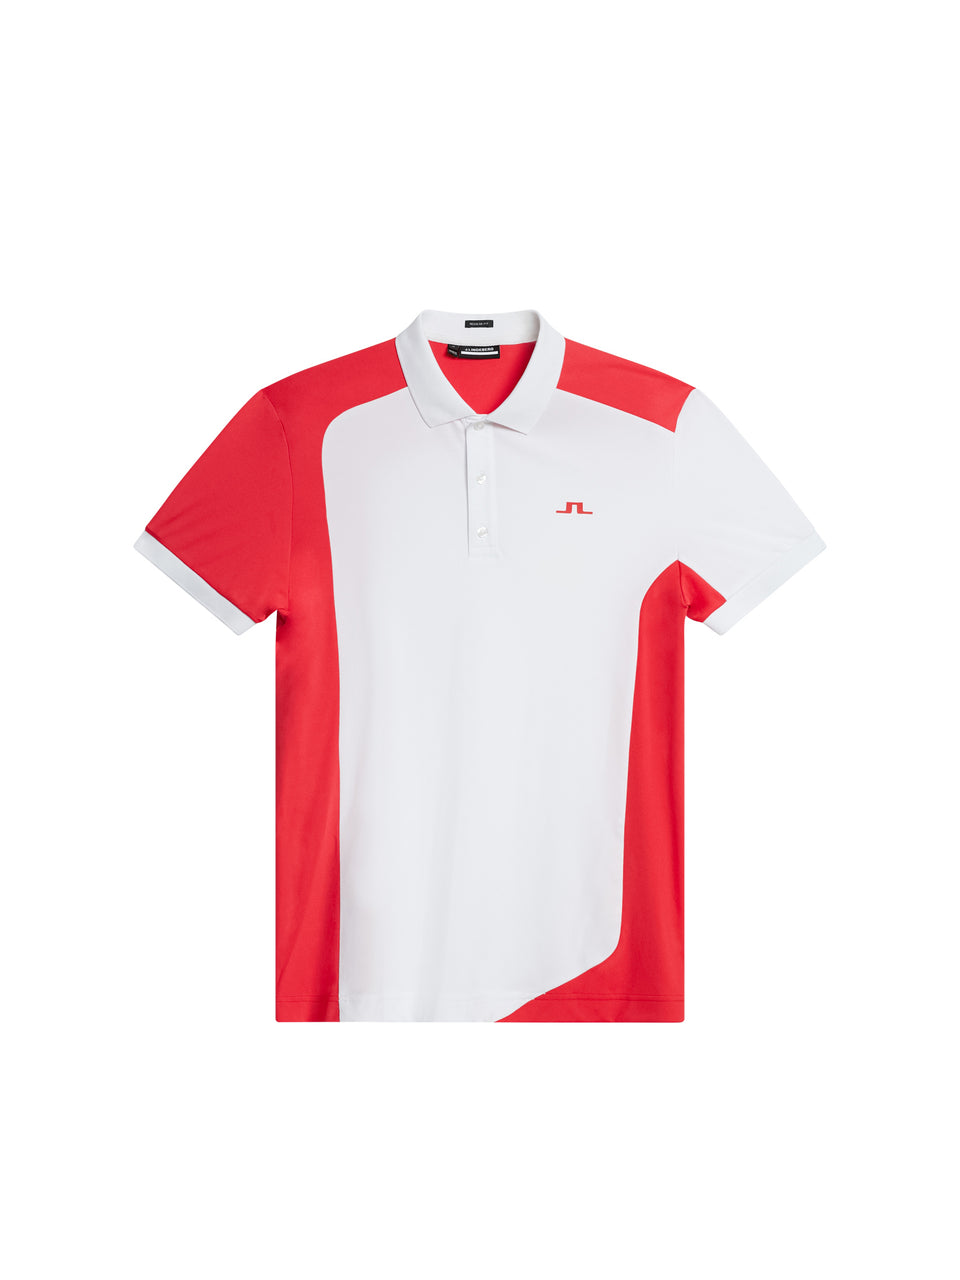 Marc Regular Fit Polo / White